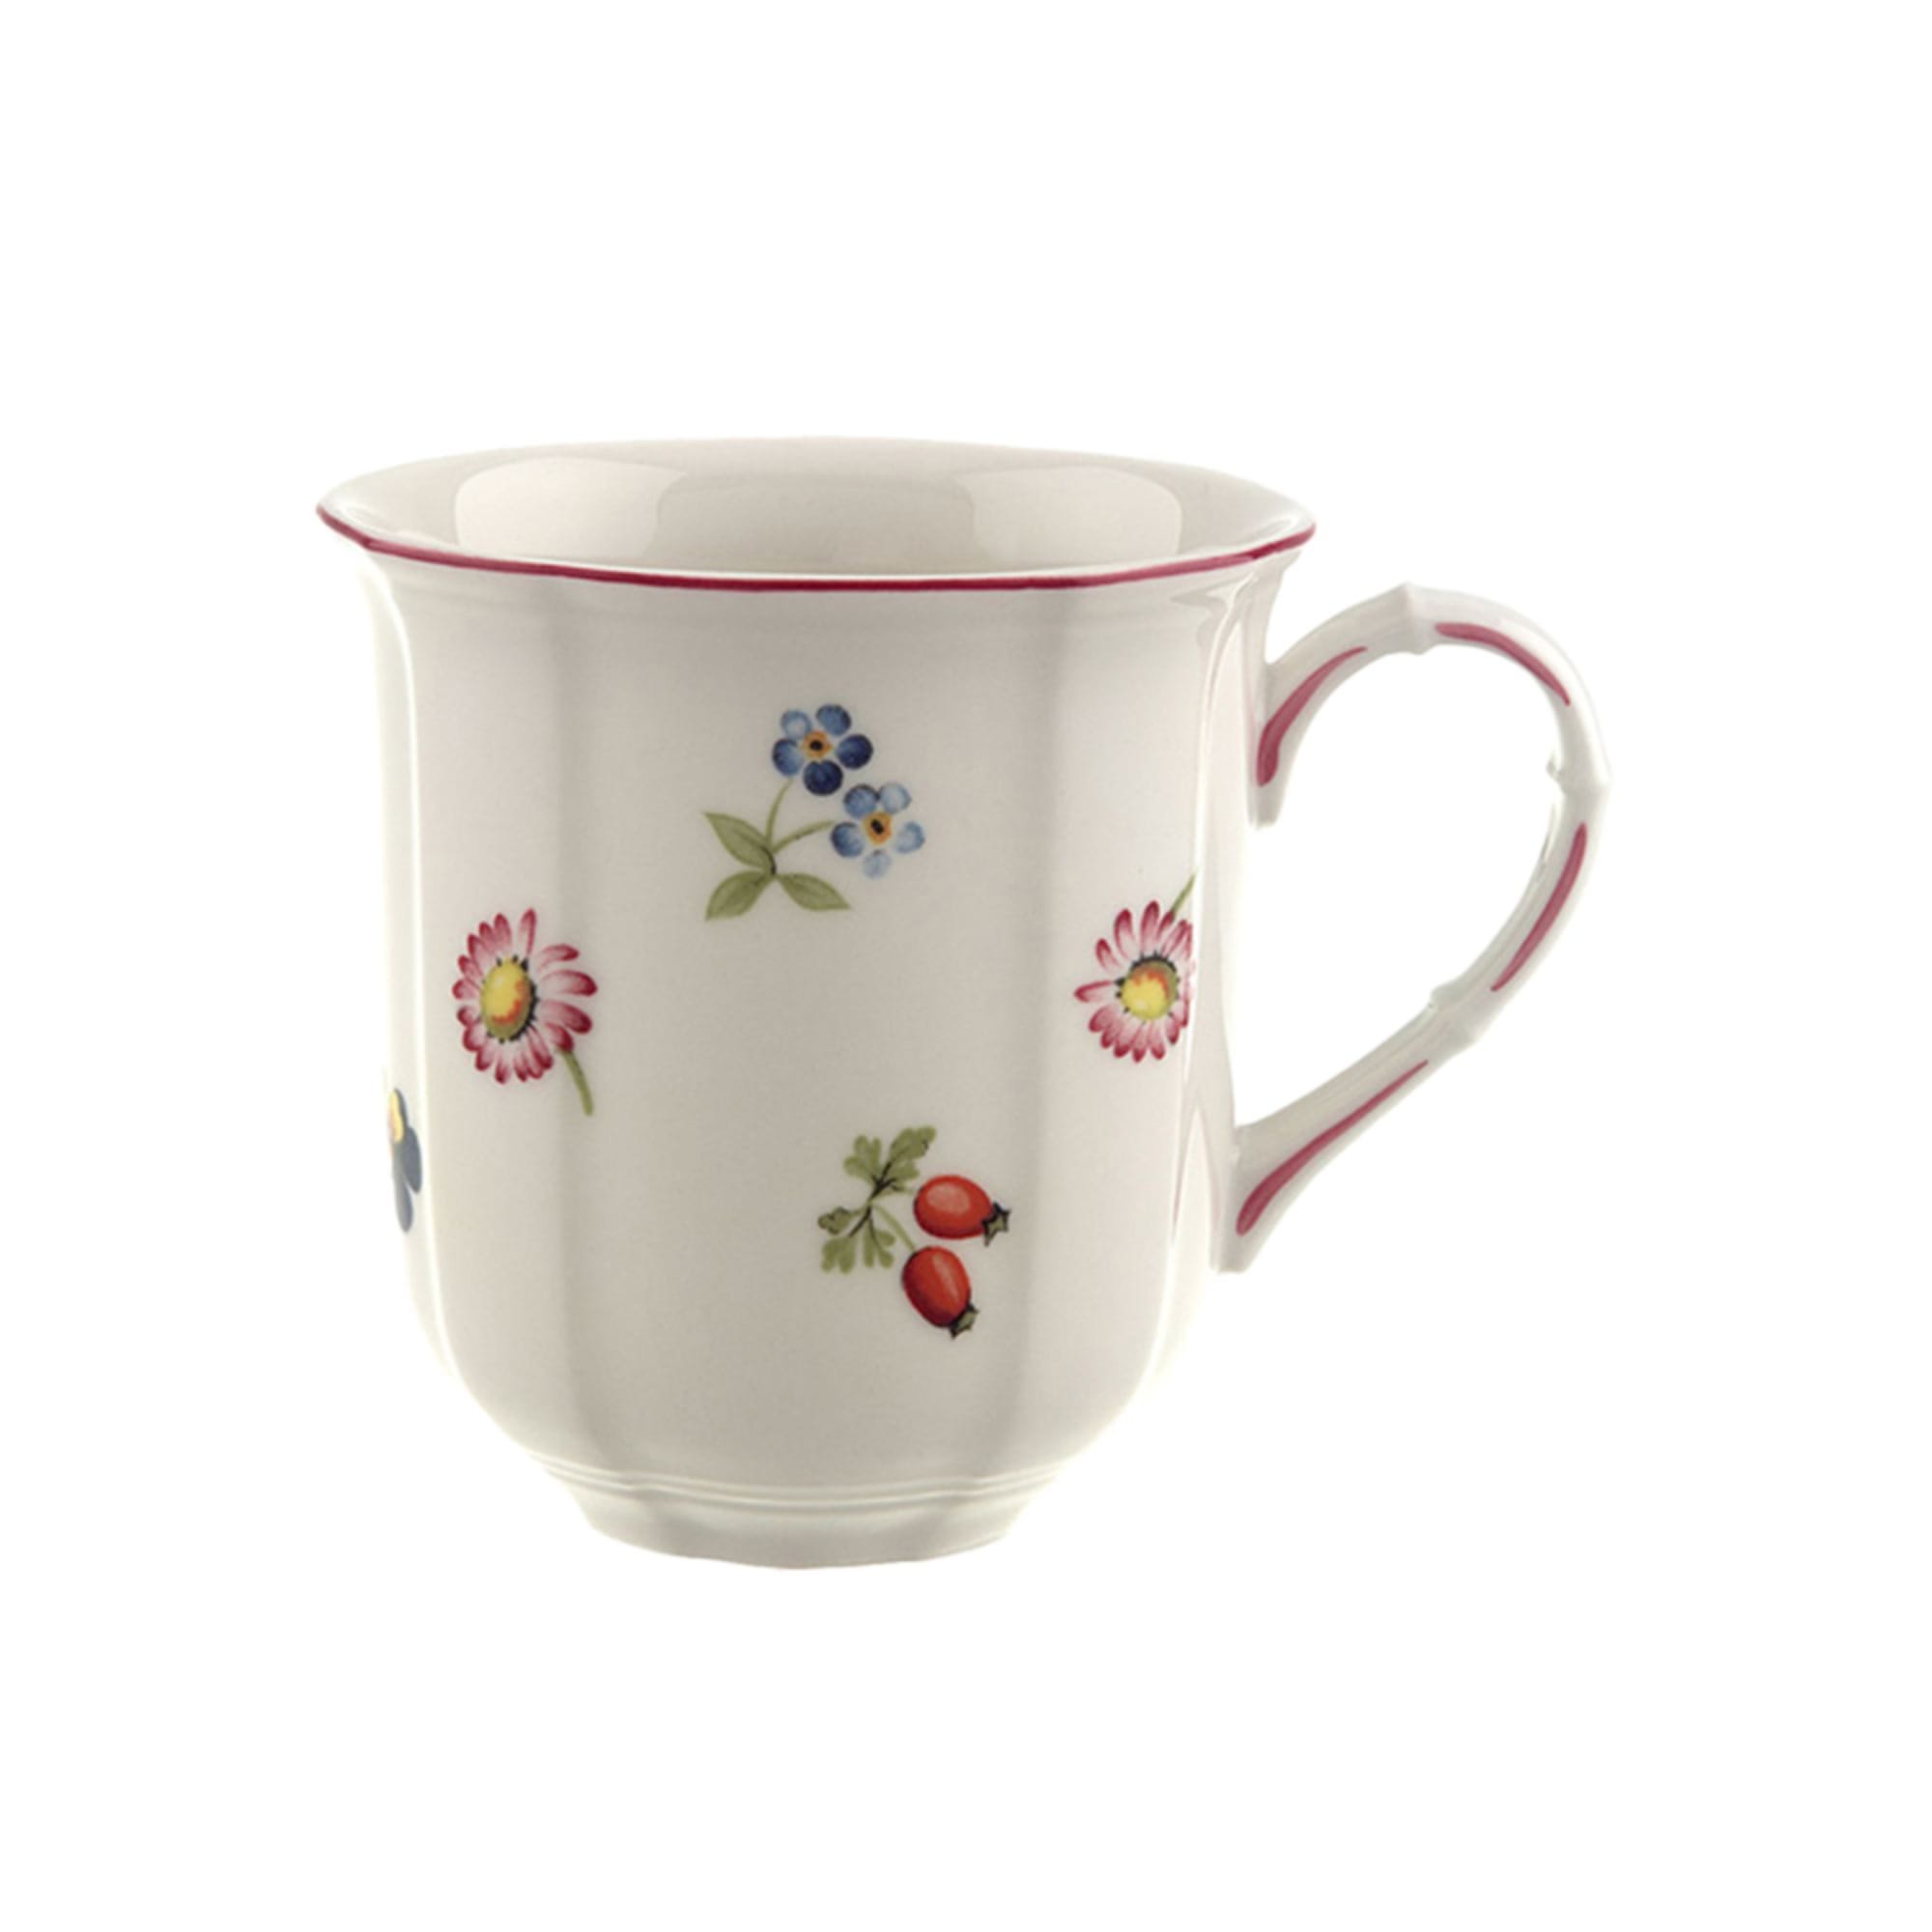 https://res.cloudinary.com/kitchenwarehouse/image/upload/c_fill,g_face,w_1250/f_auto/t_PDP_2000x2000/Supplier%20Images%20/2000px/Villeroy-Boch-Petite-Fleur-Mug-300m_1_2000px.jpg?imagetype=pdp_full